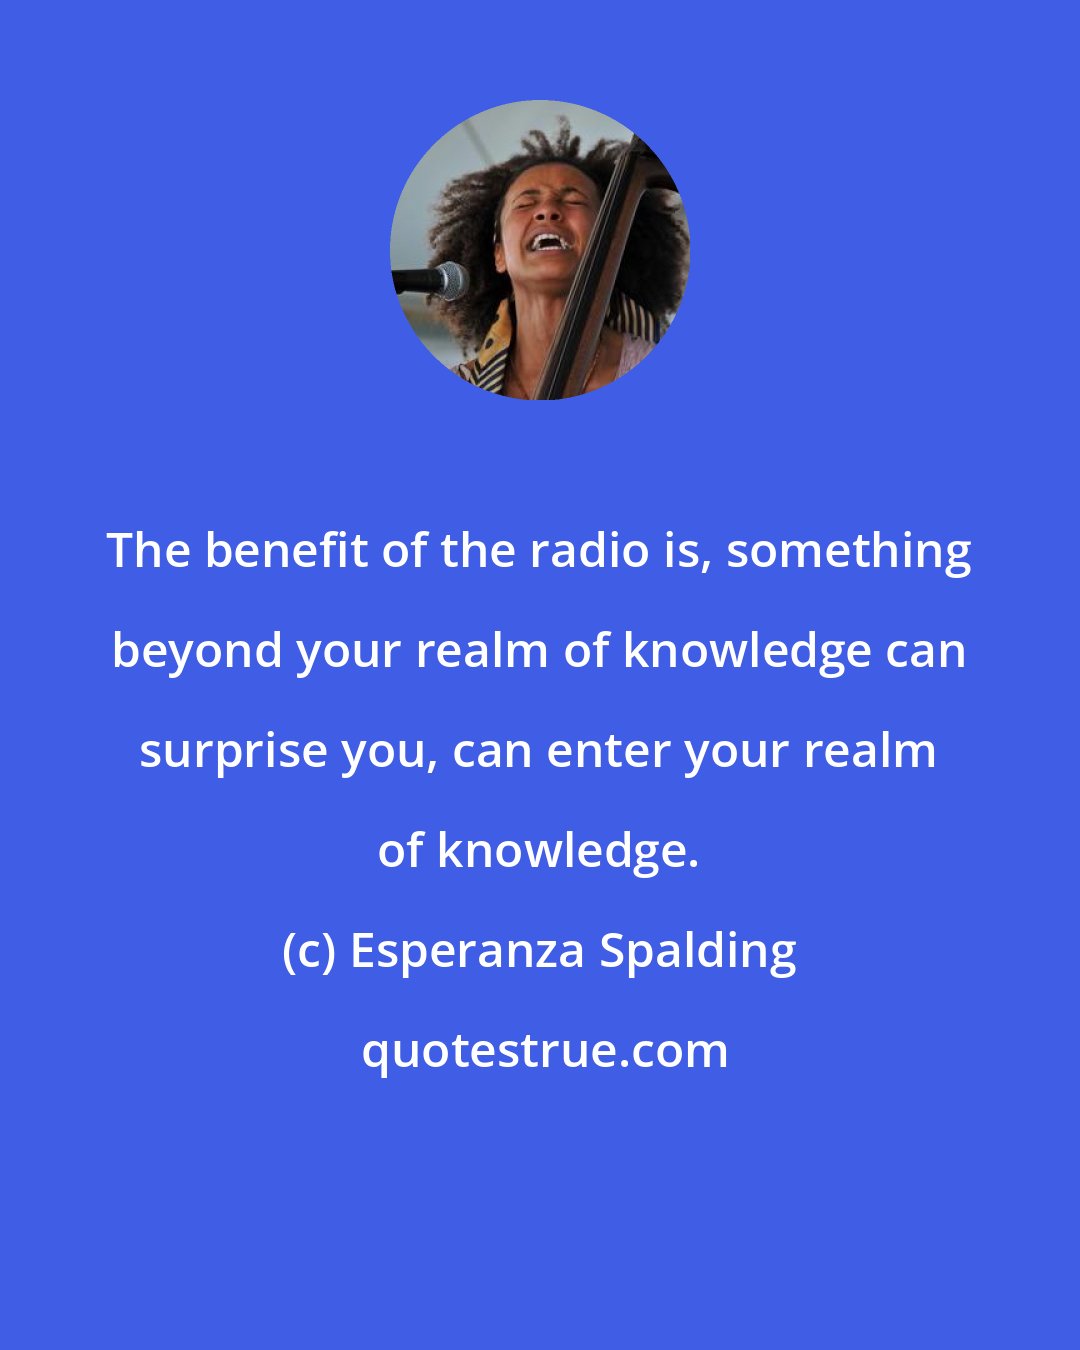 Esperanza Spalding: The benefit of the radio is, something beyond your realm of knowledge can surprise you, can enter your realm of knowledge.